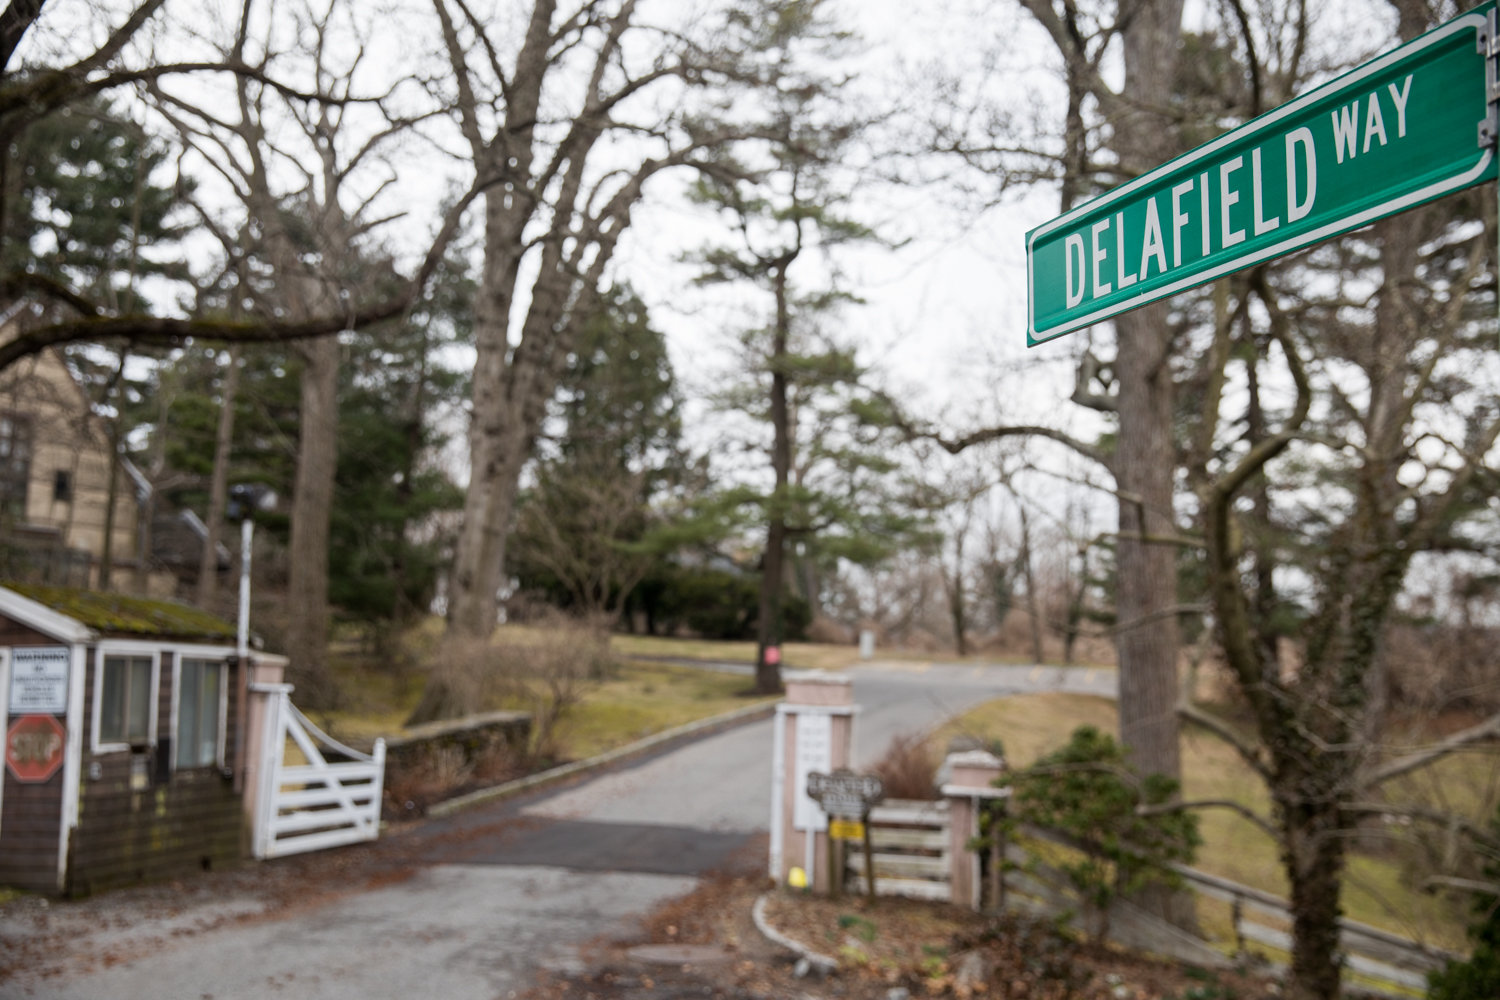 A vacant plot of land along Delafield Way has been the site of a number of false development starts over the years. But that could change if latest plans to build 19 more houses — to join the existing 15 — makes it through the city’s red tape, beginning with Community Board 8.